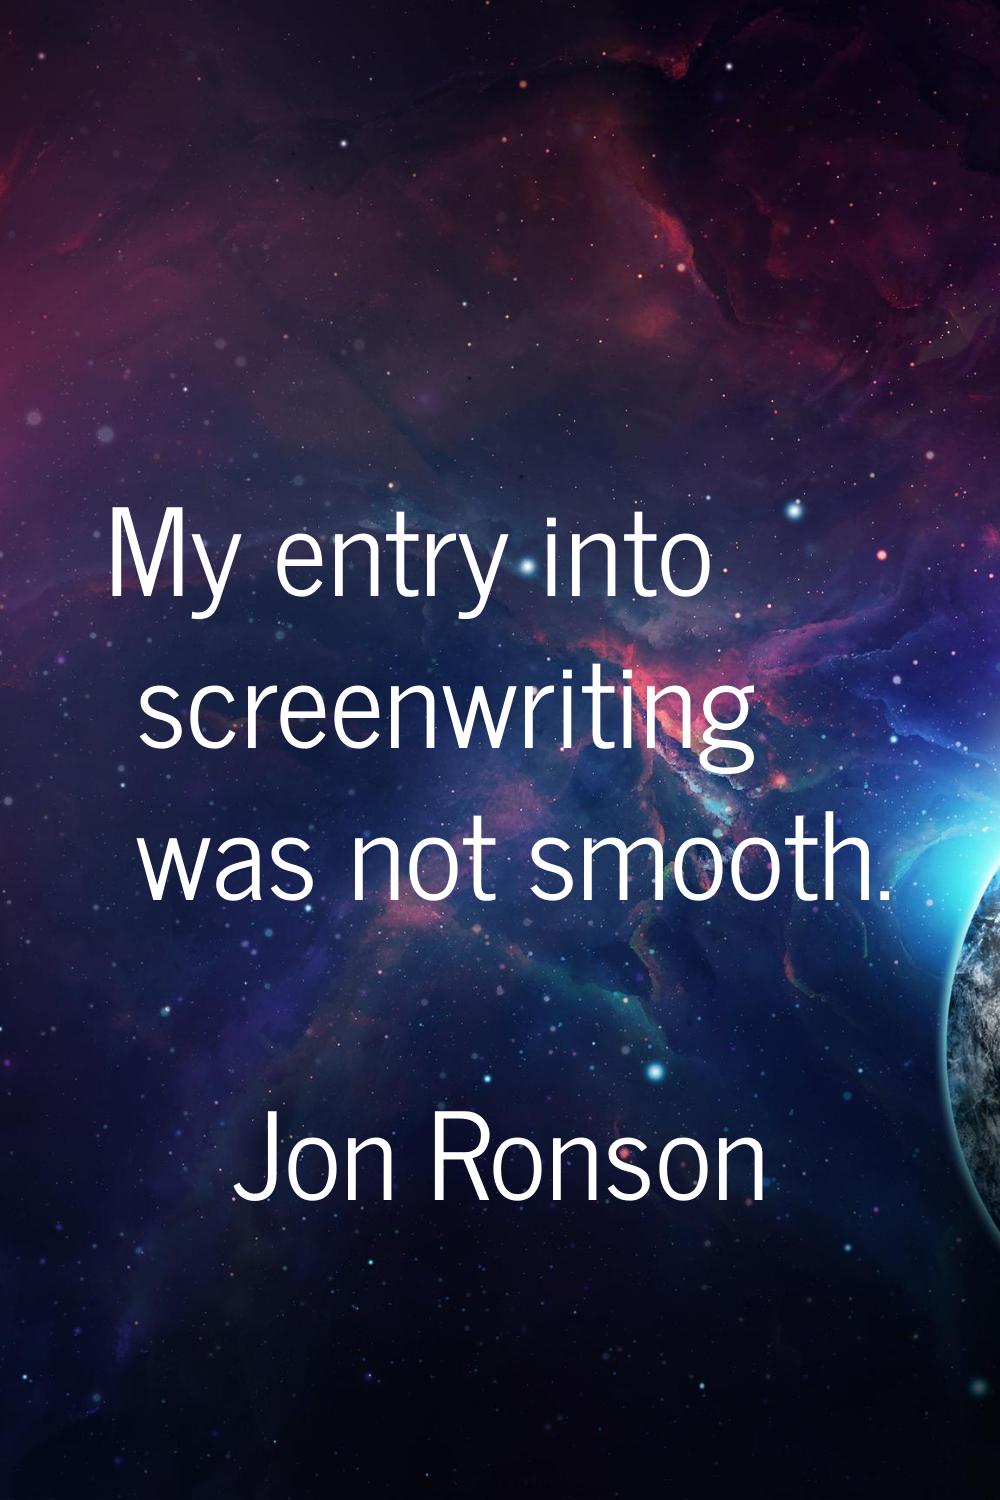 My entry into screenwriting was not smooth.